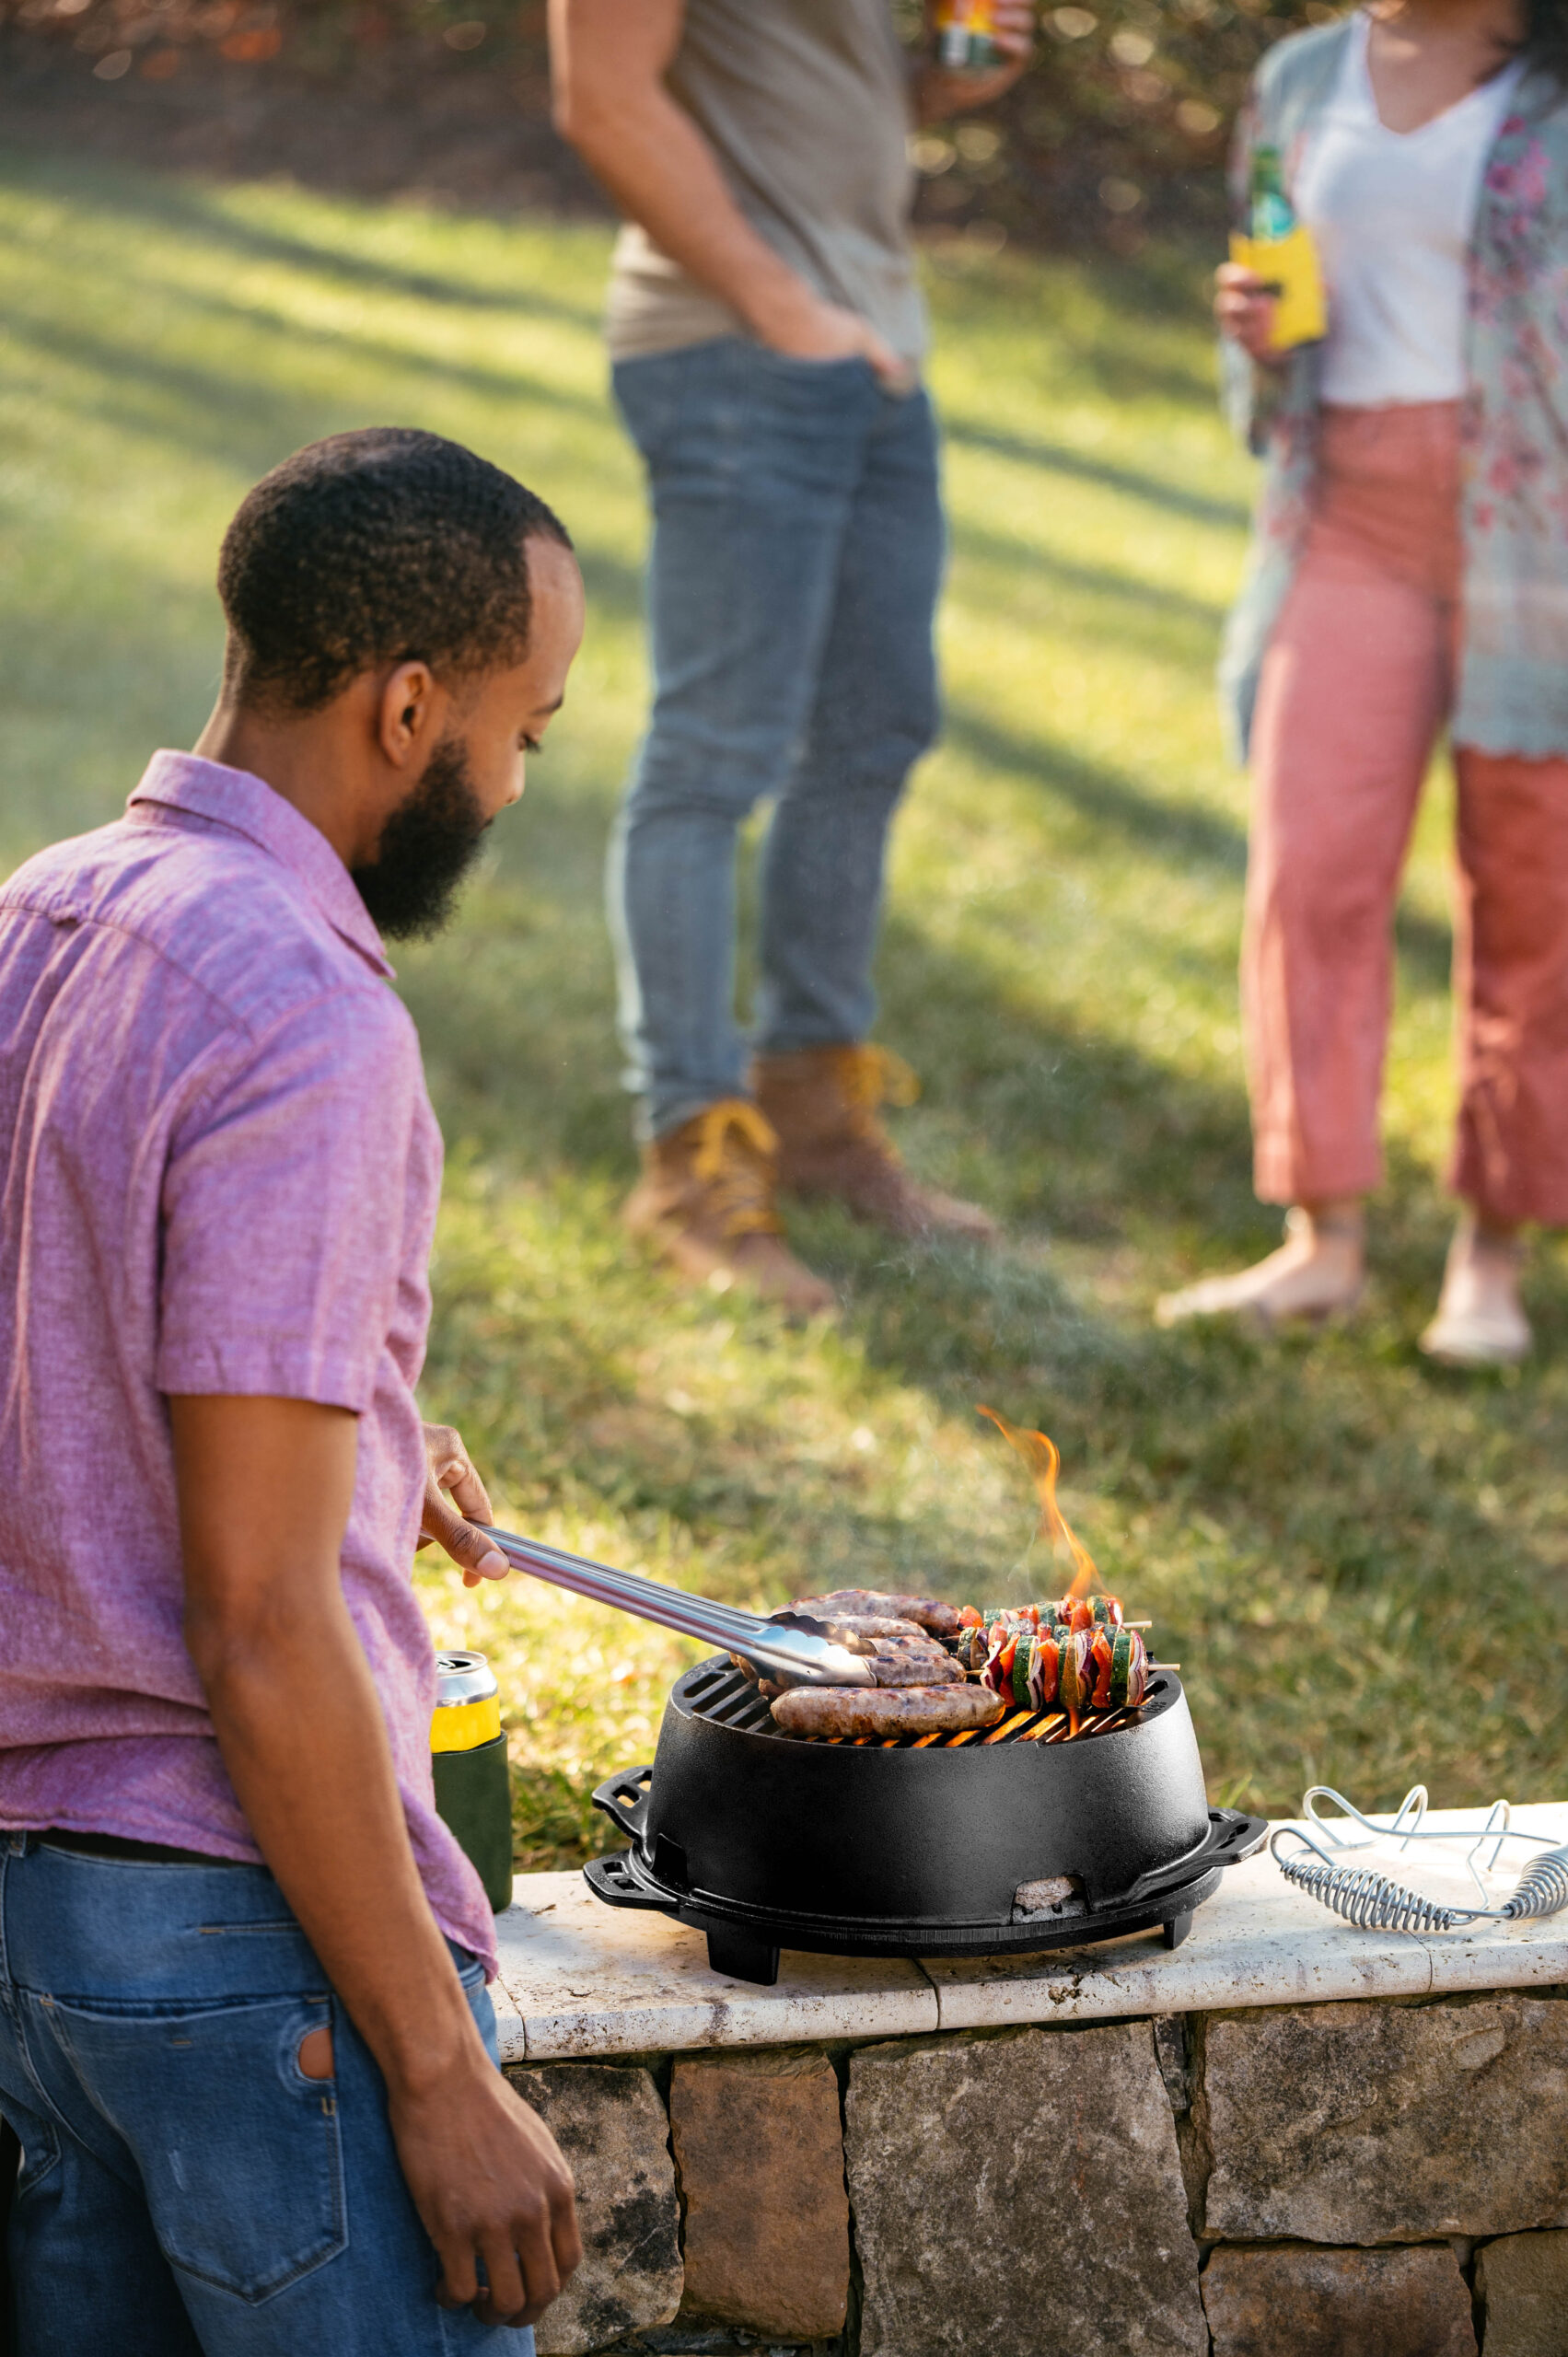 Lodge Cast Iron: Great Camping Gear and Best Fall Recipes - The RV Atlas